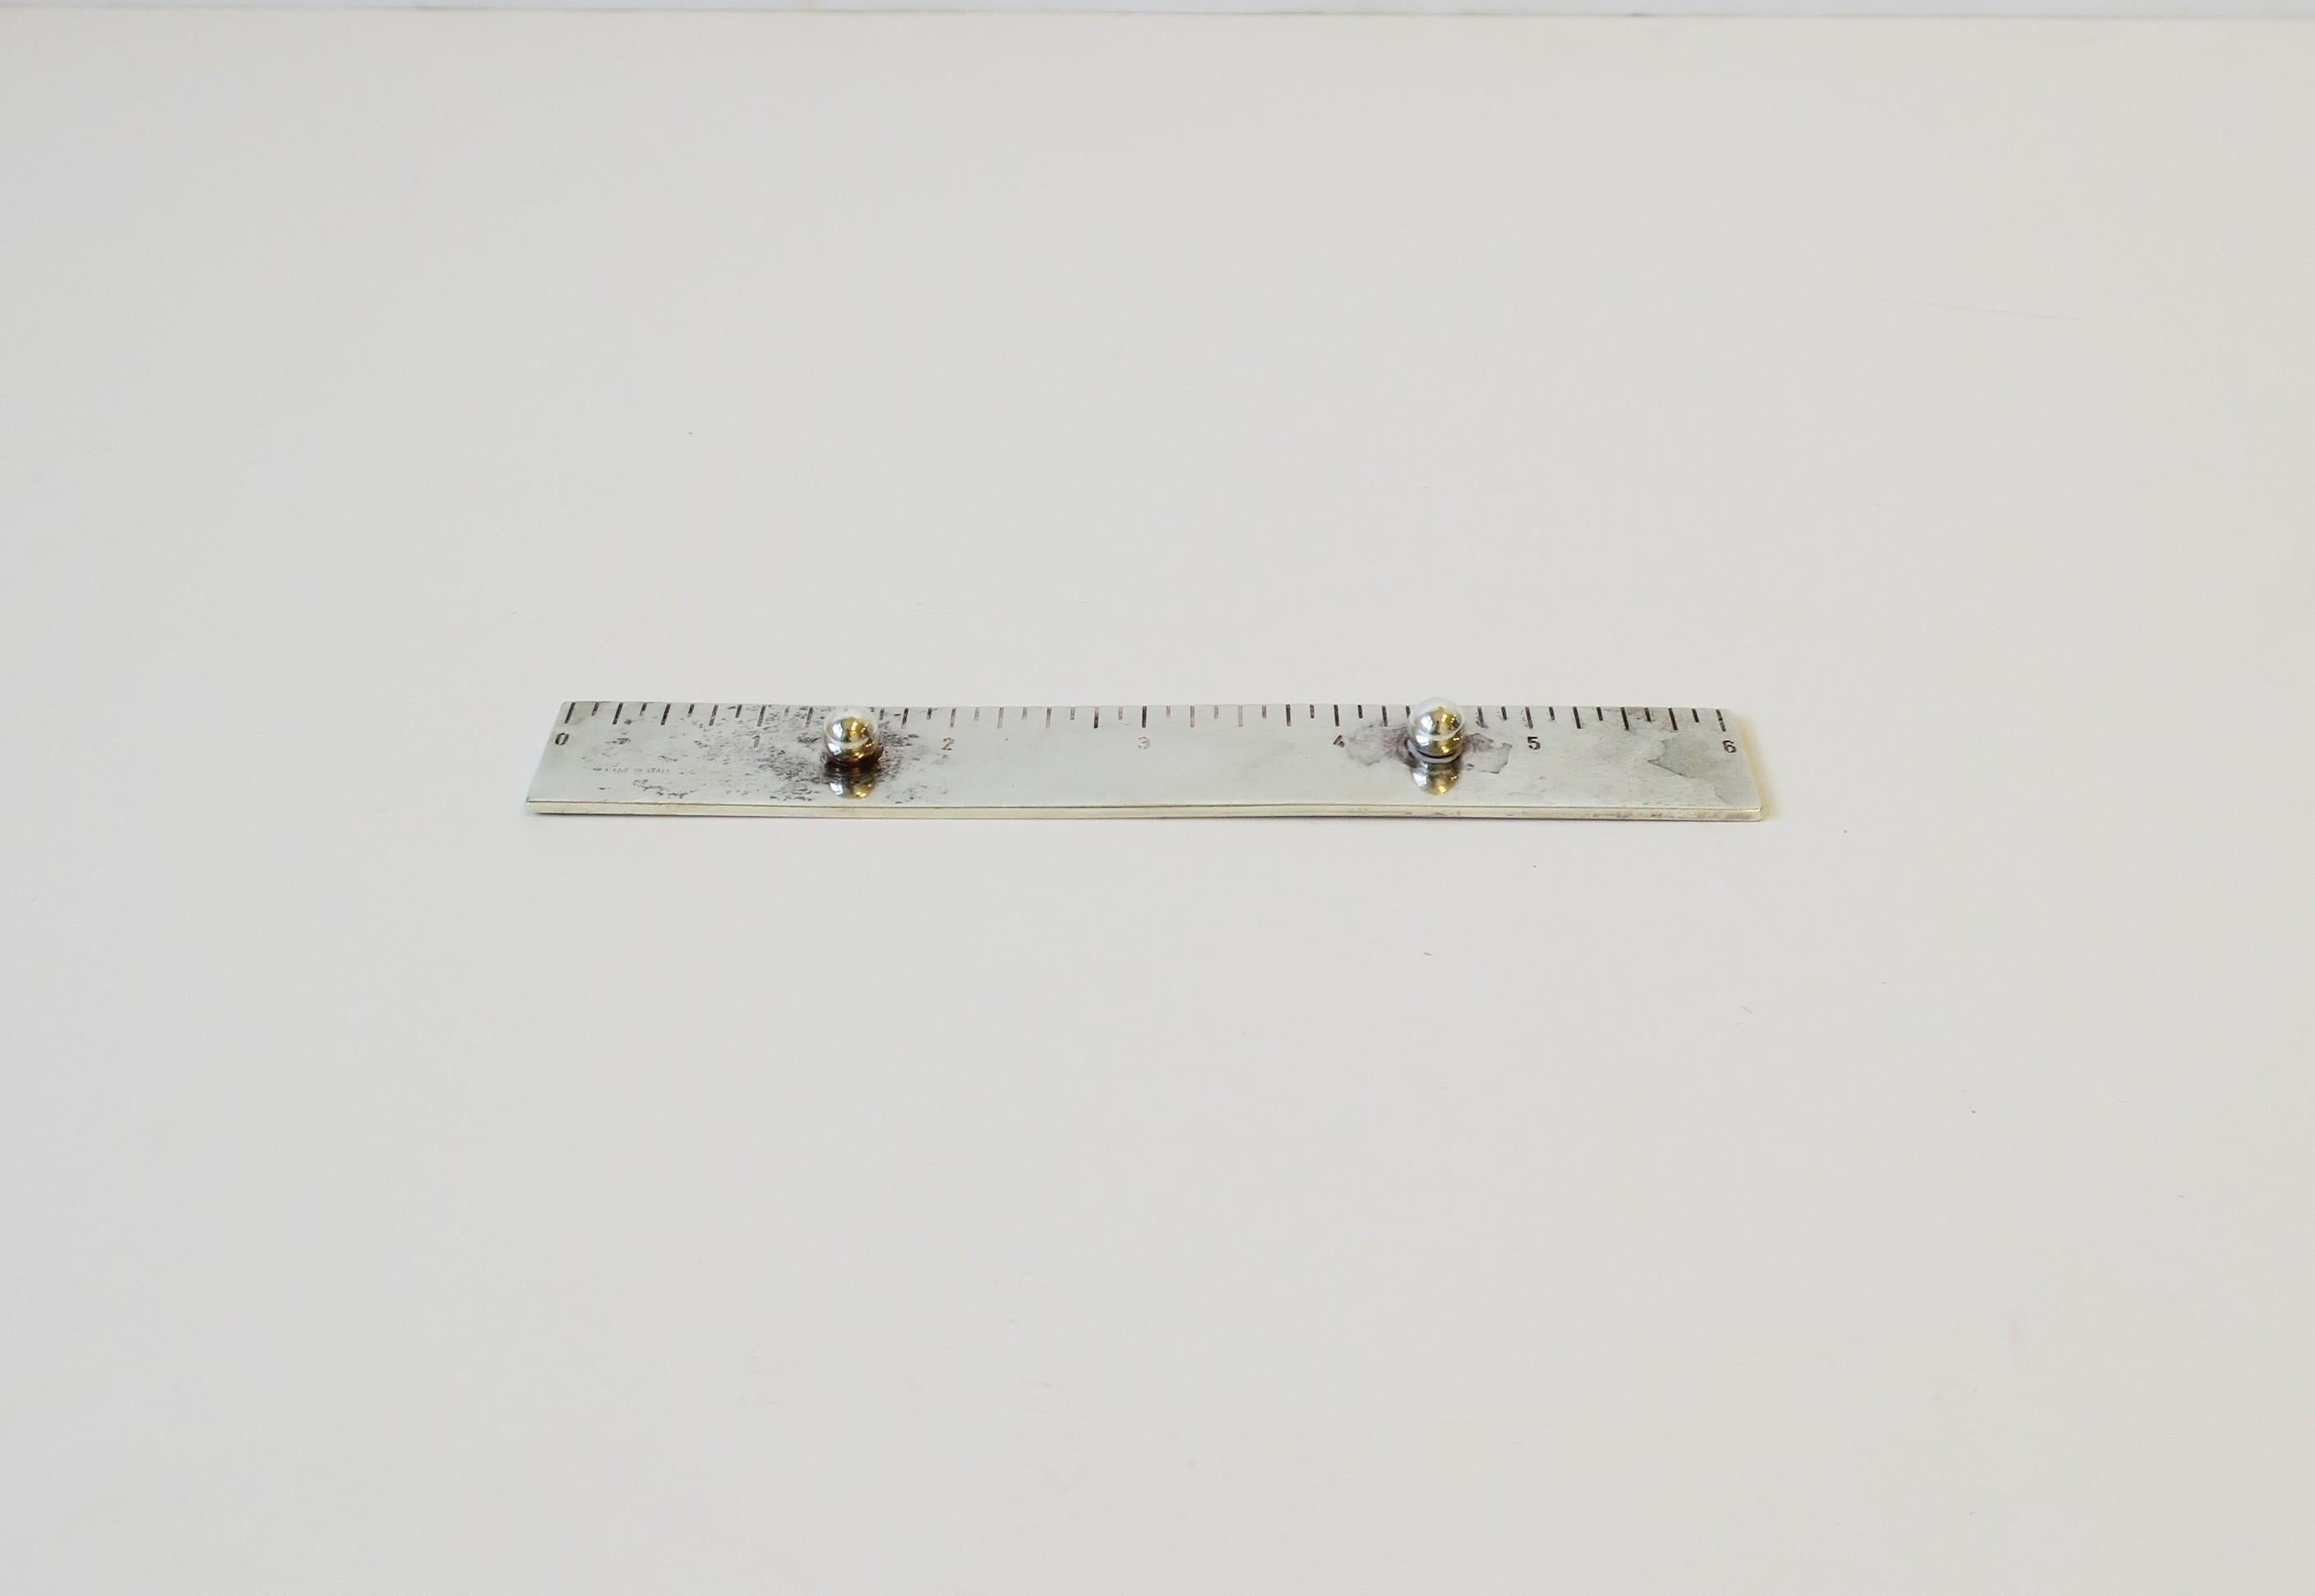 1.54 inches on a ruler